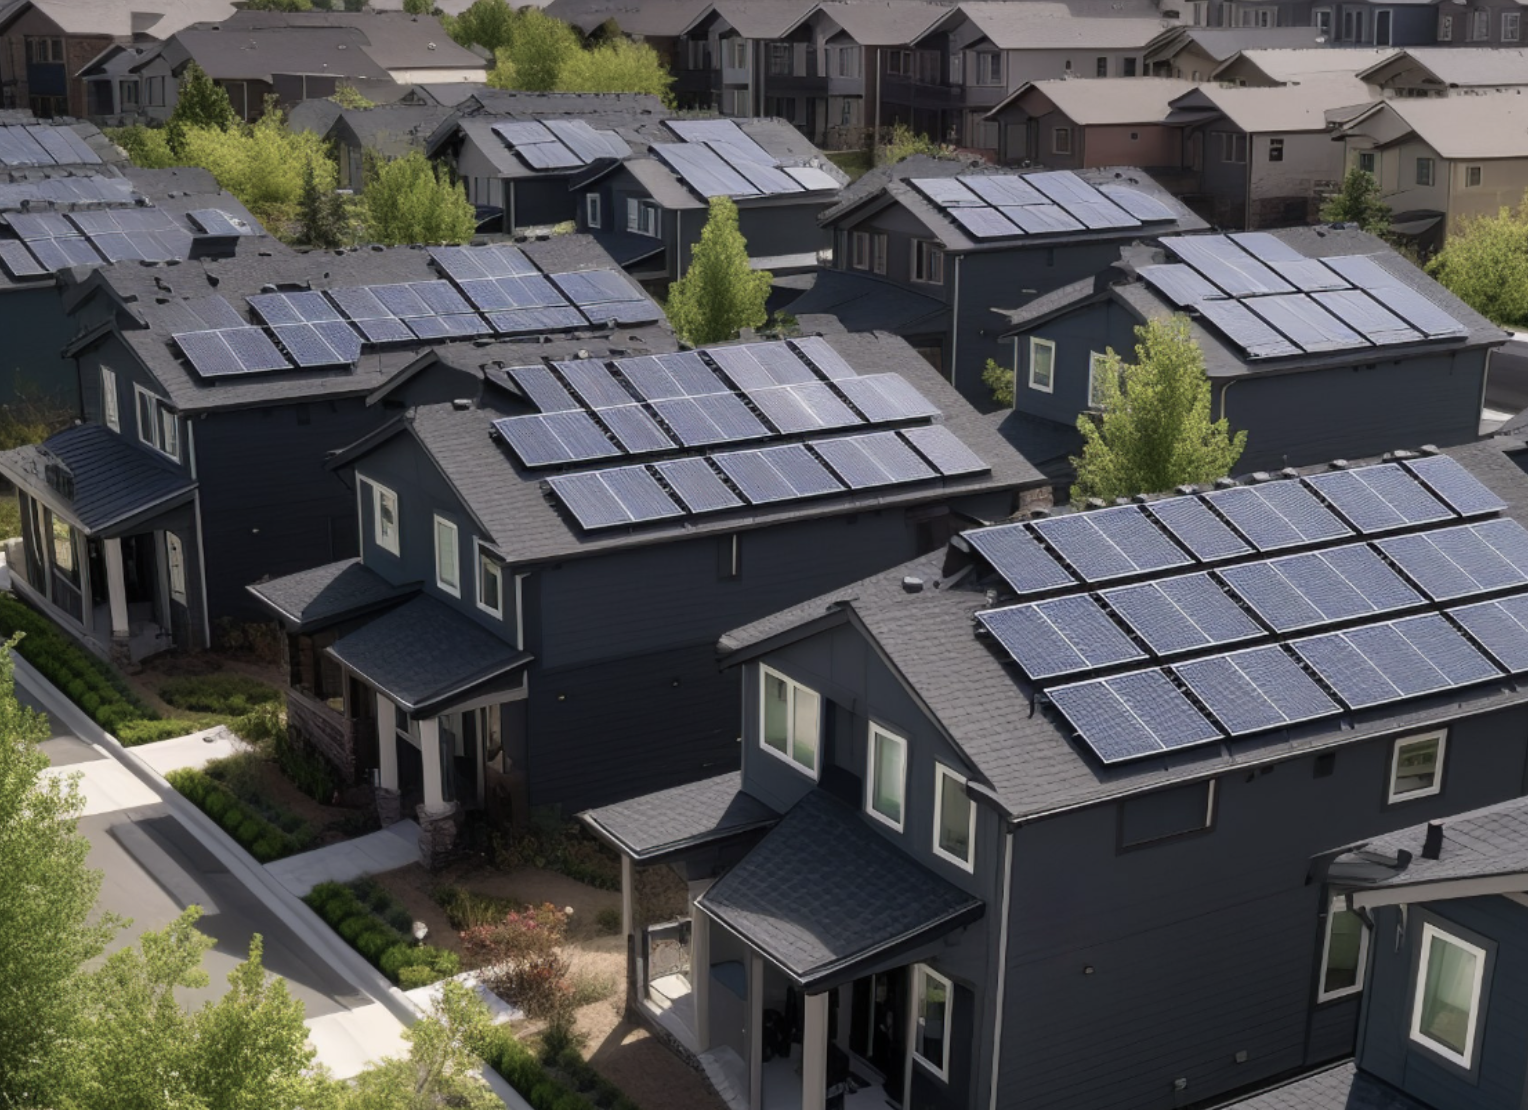 California’s Exploding Rooftop Solar Cost Shift